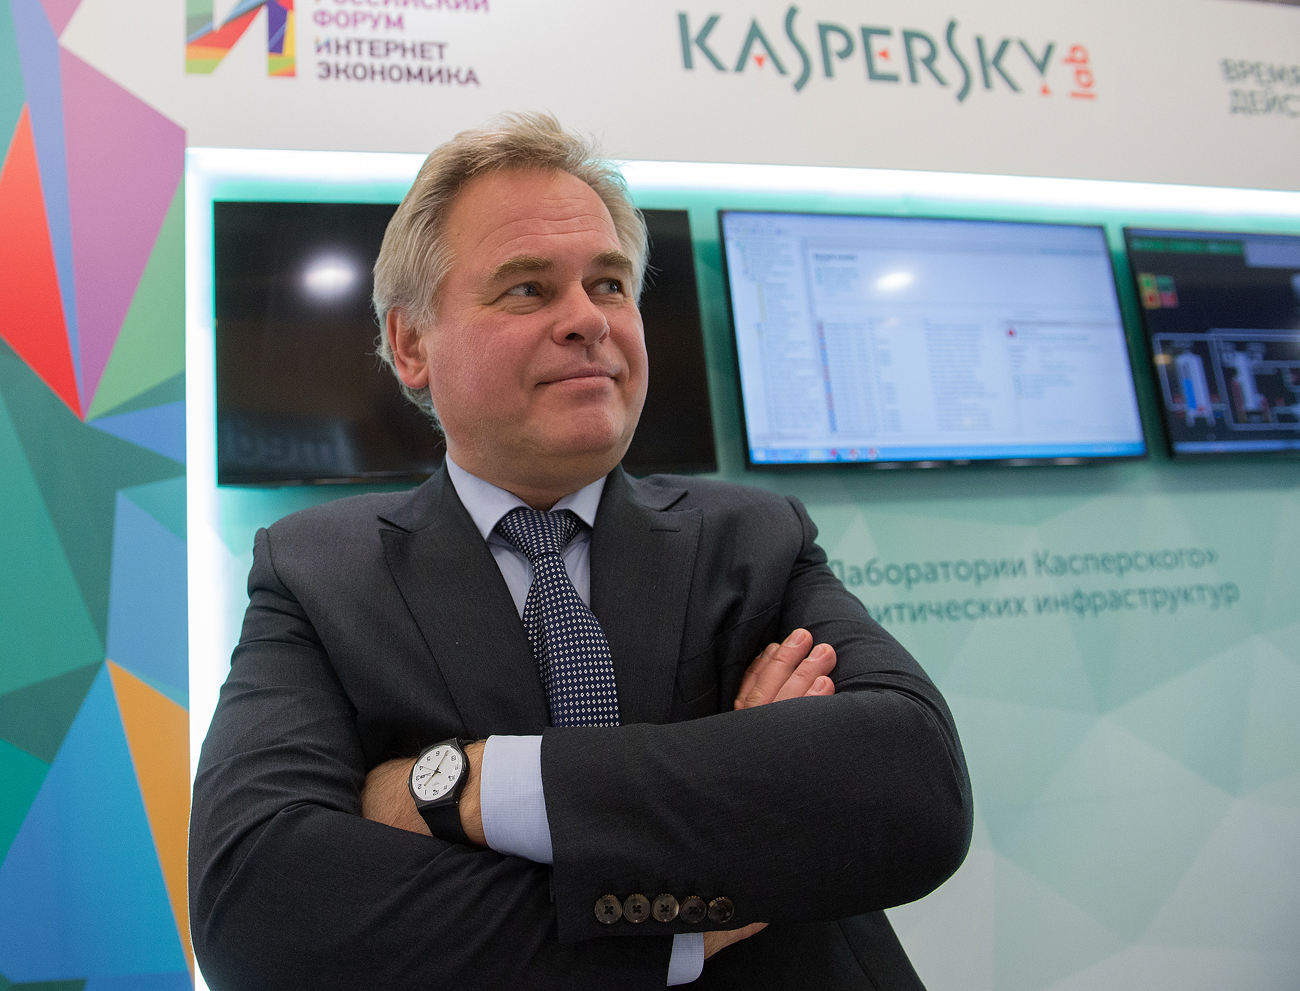 Head of Kaspersky Lab Yevgeny Kaspersky at his company's display stand at the first Russian Internet Economy forum.